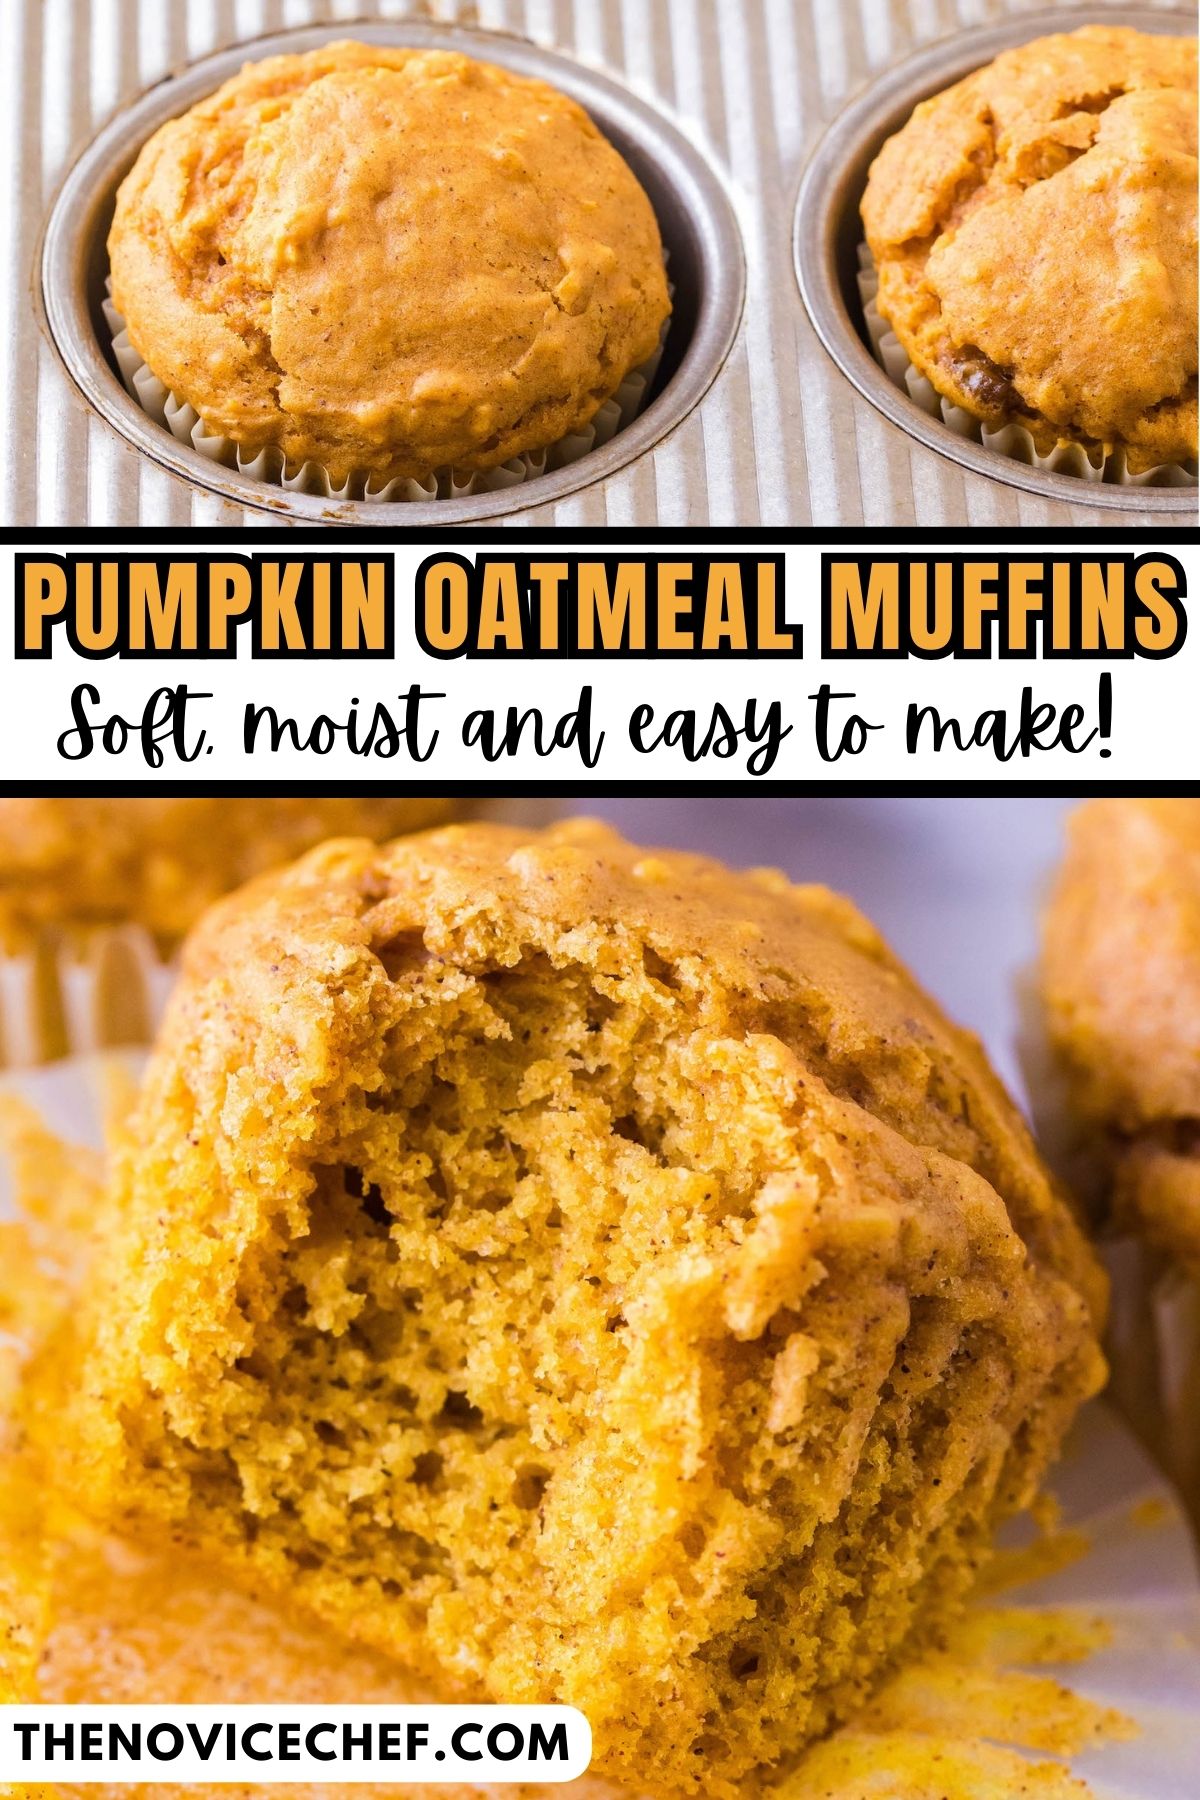 The BEST Pumpkin Oatmeal Muffins | The Novice Chef